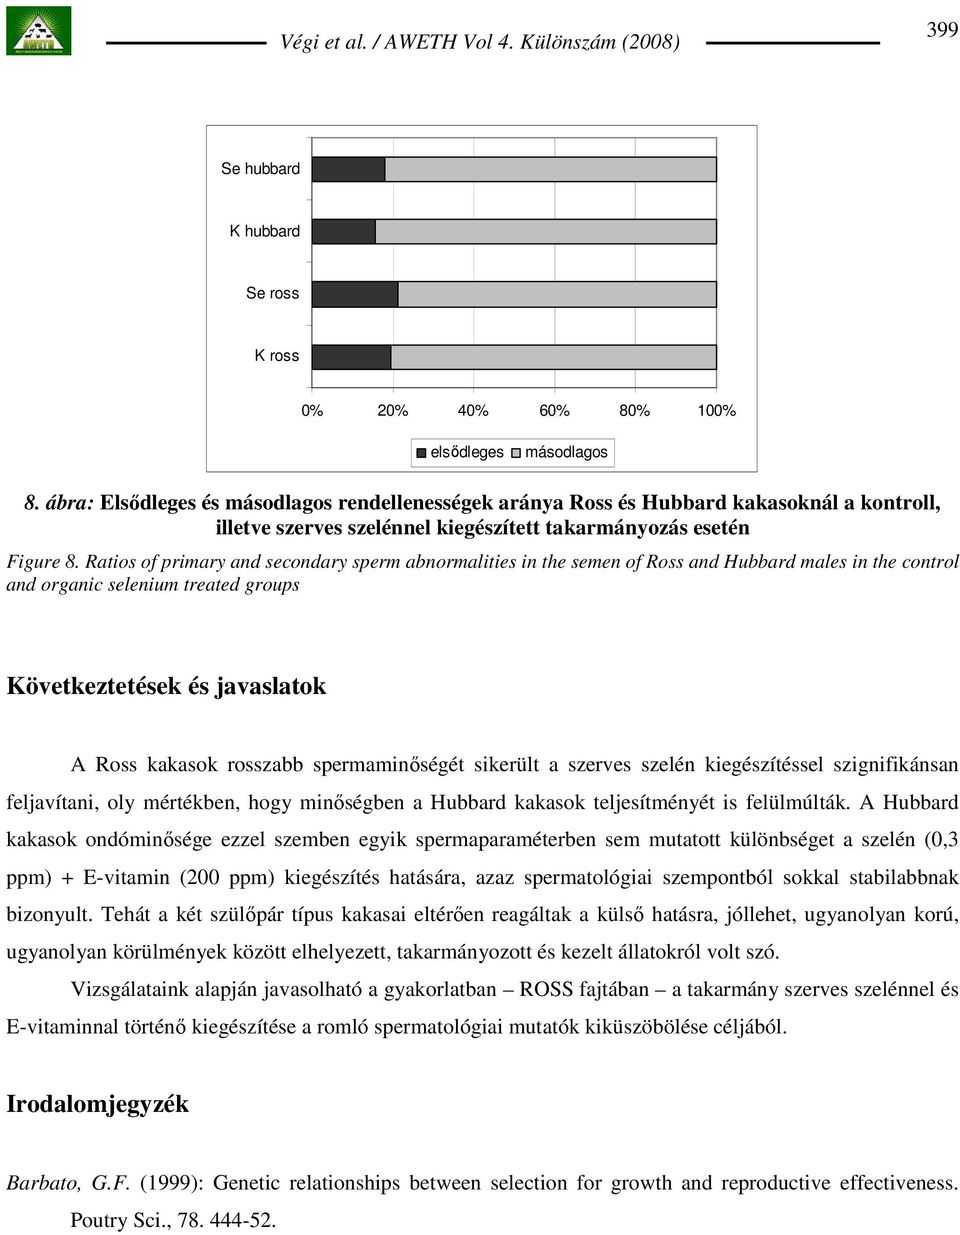 Ratios of primary and secondary sperm abnormalities in the semen of Ross and Hubbard males in the control and organic selenium treated groups Következtetések és javaslatok A Ross kakasok rosszabb